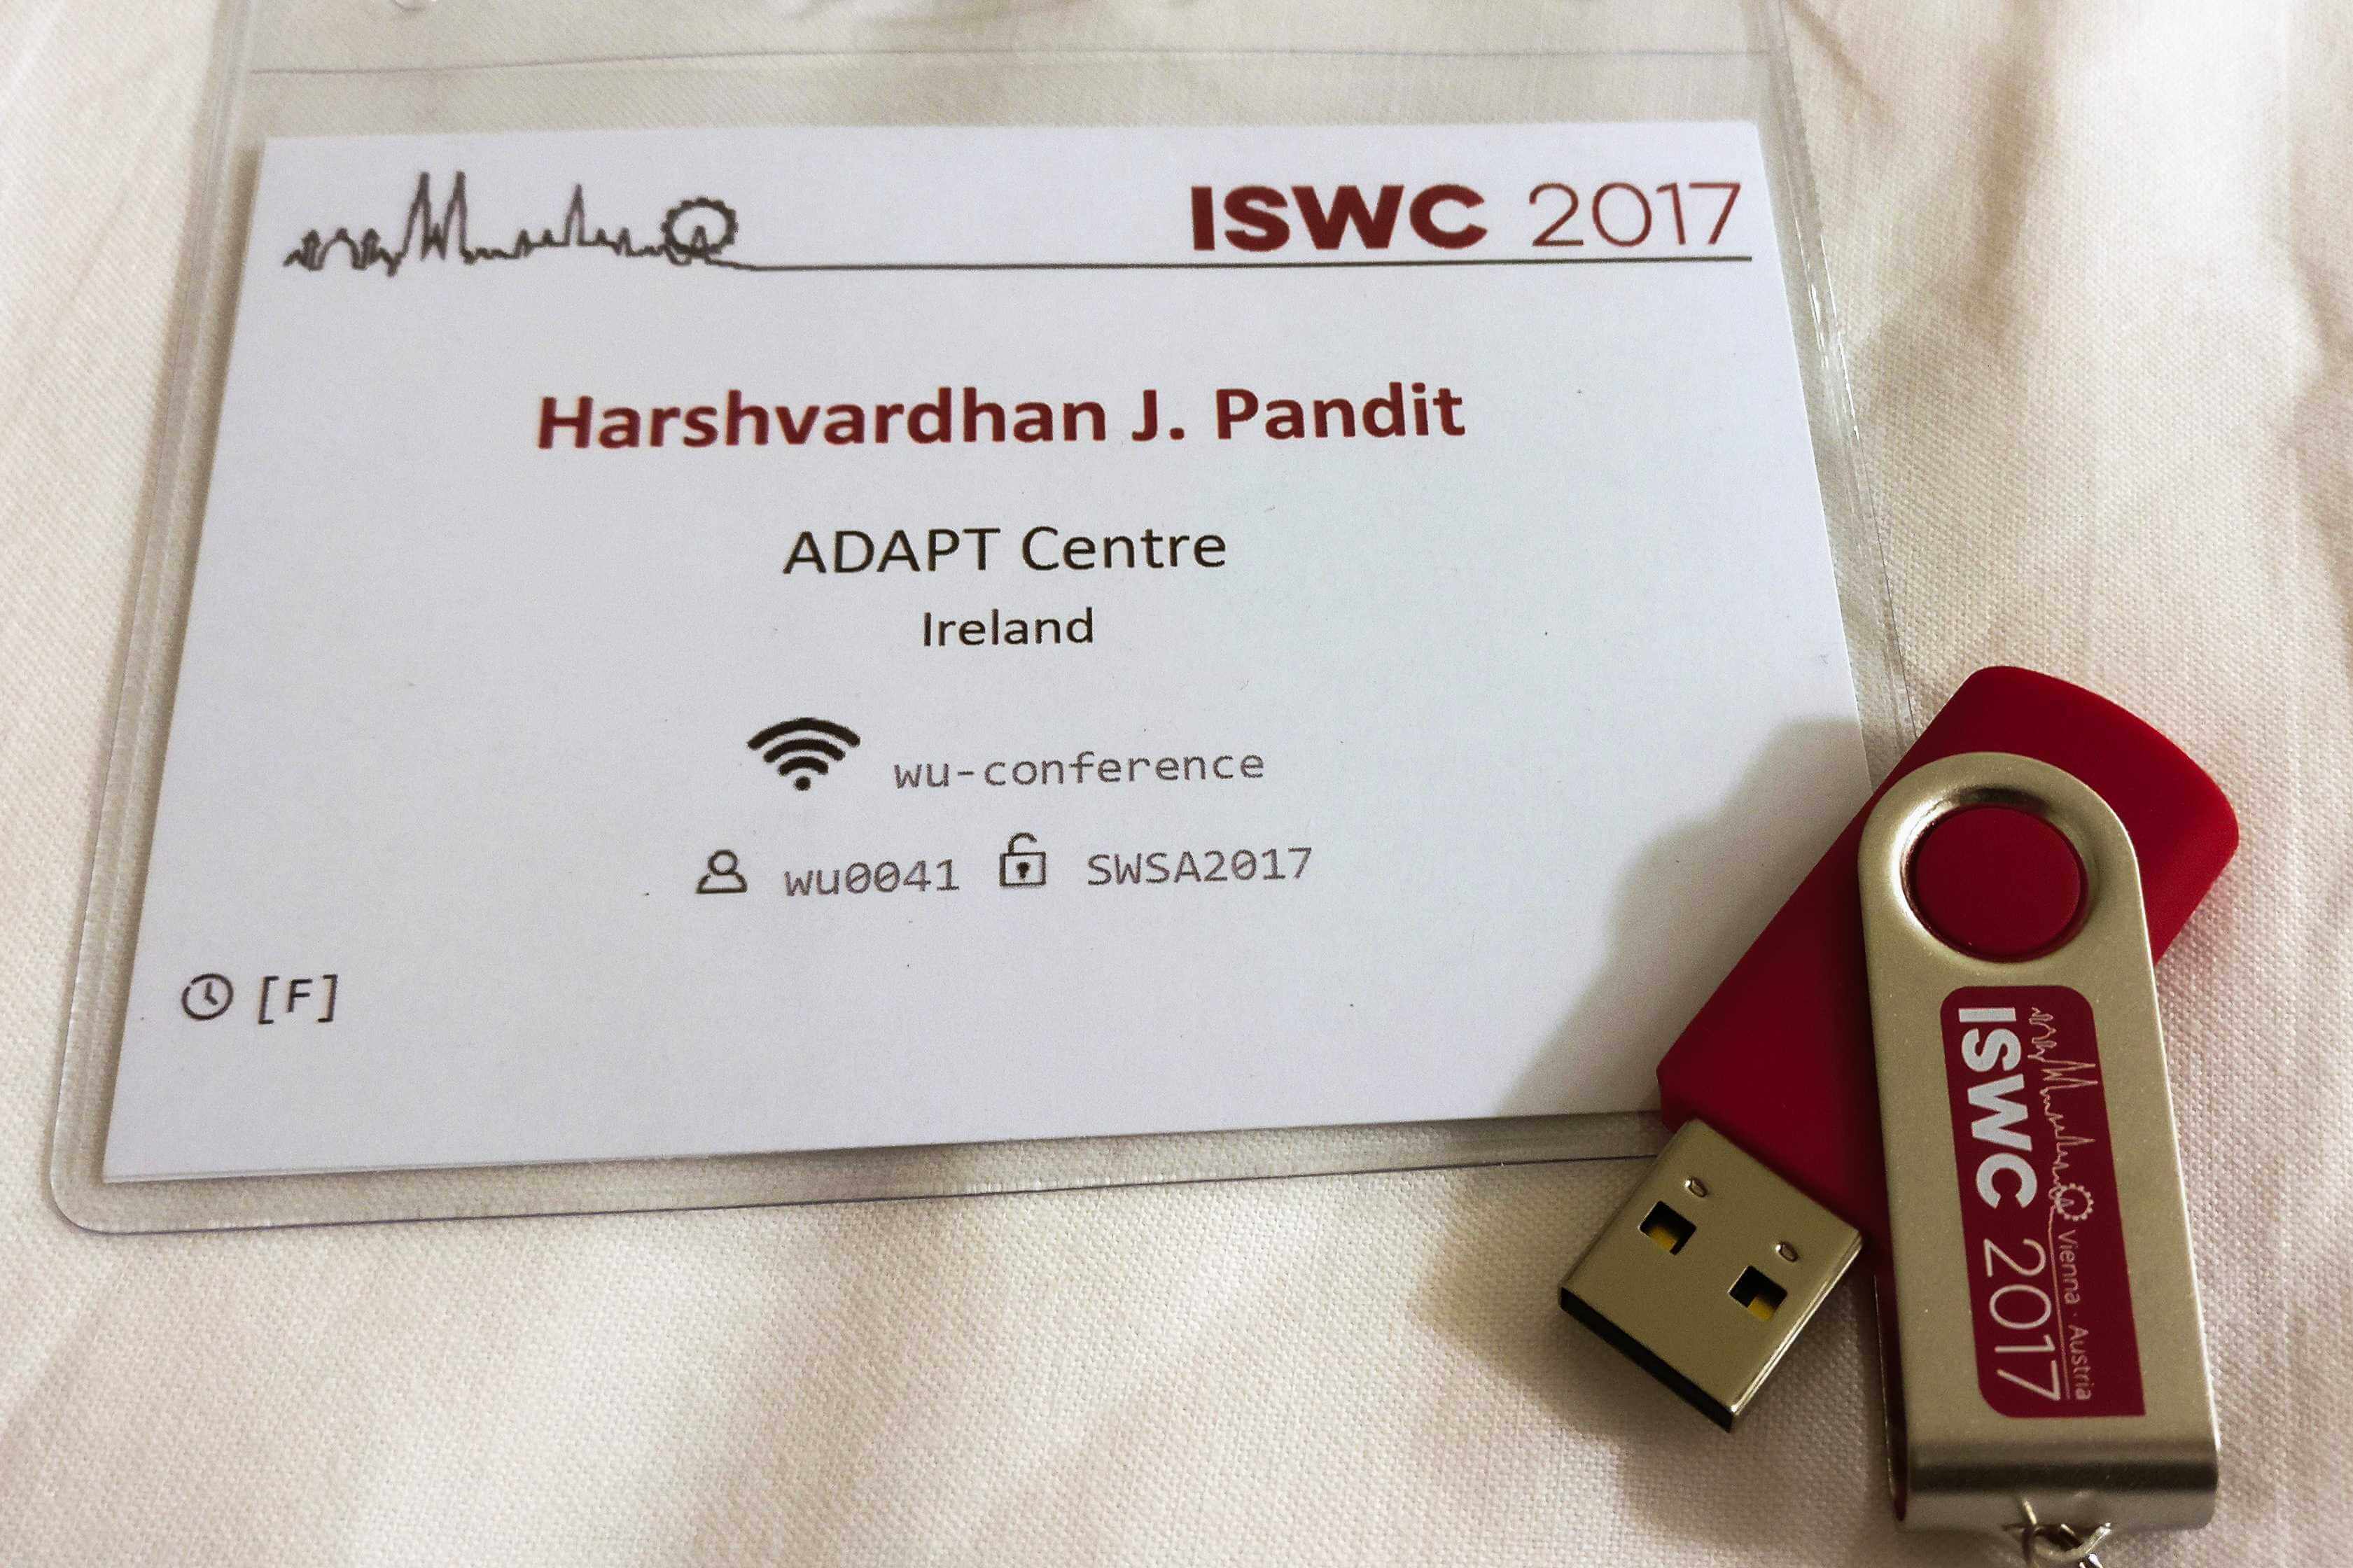 My ISWC conference badge and a complimentary USB drive with all the program and papers on it.